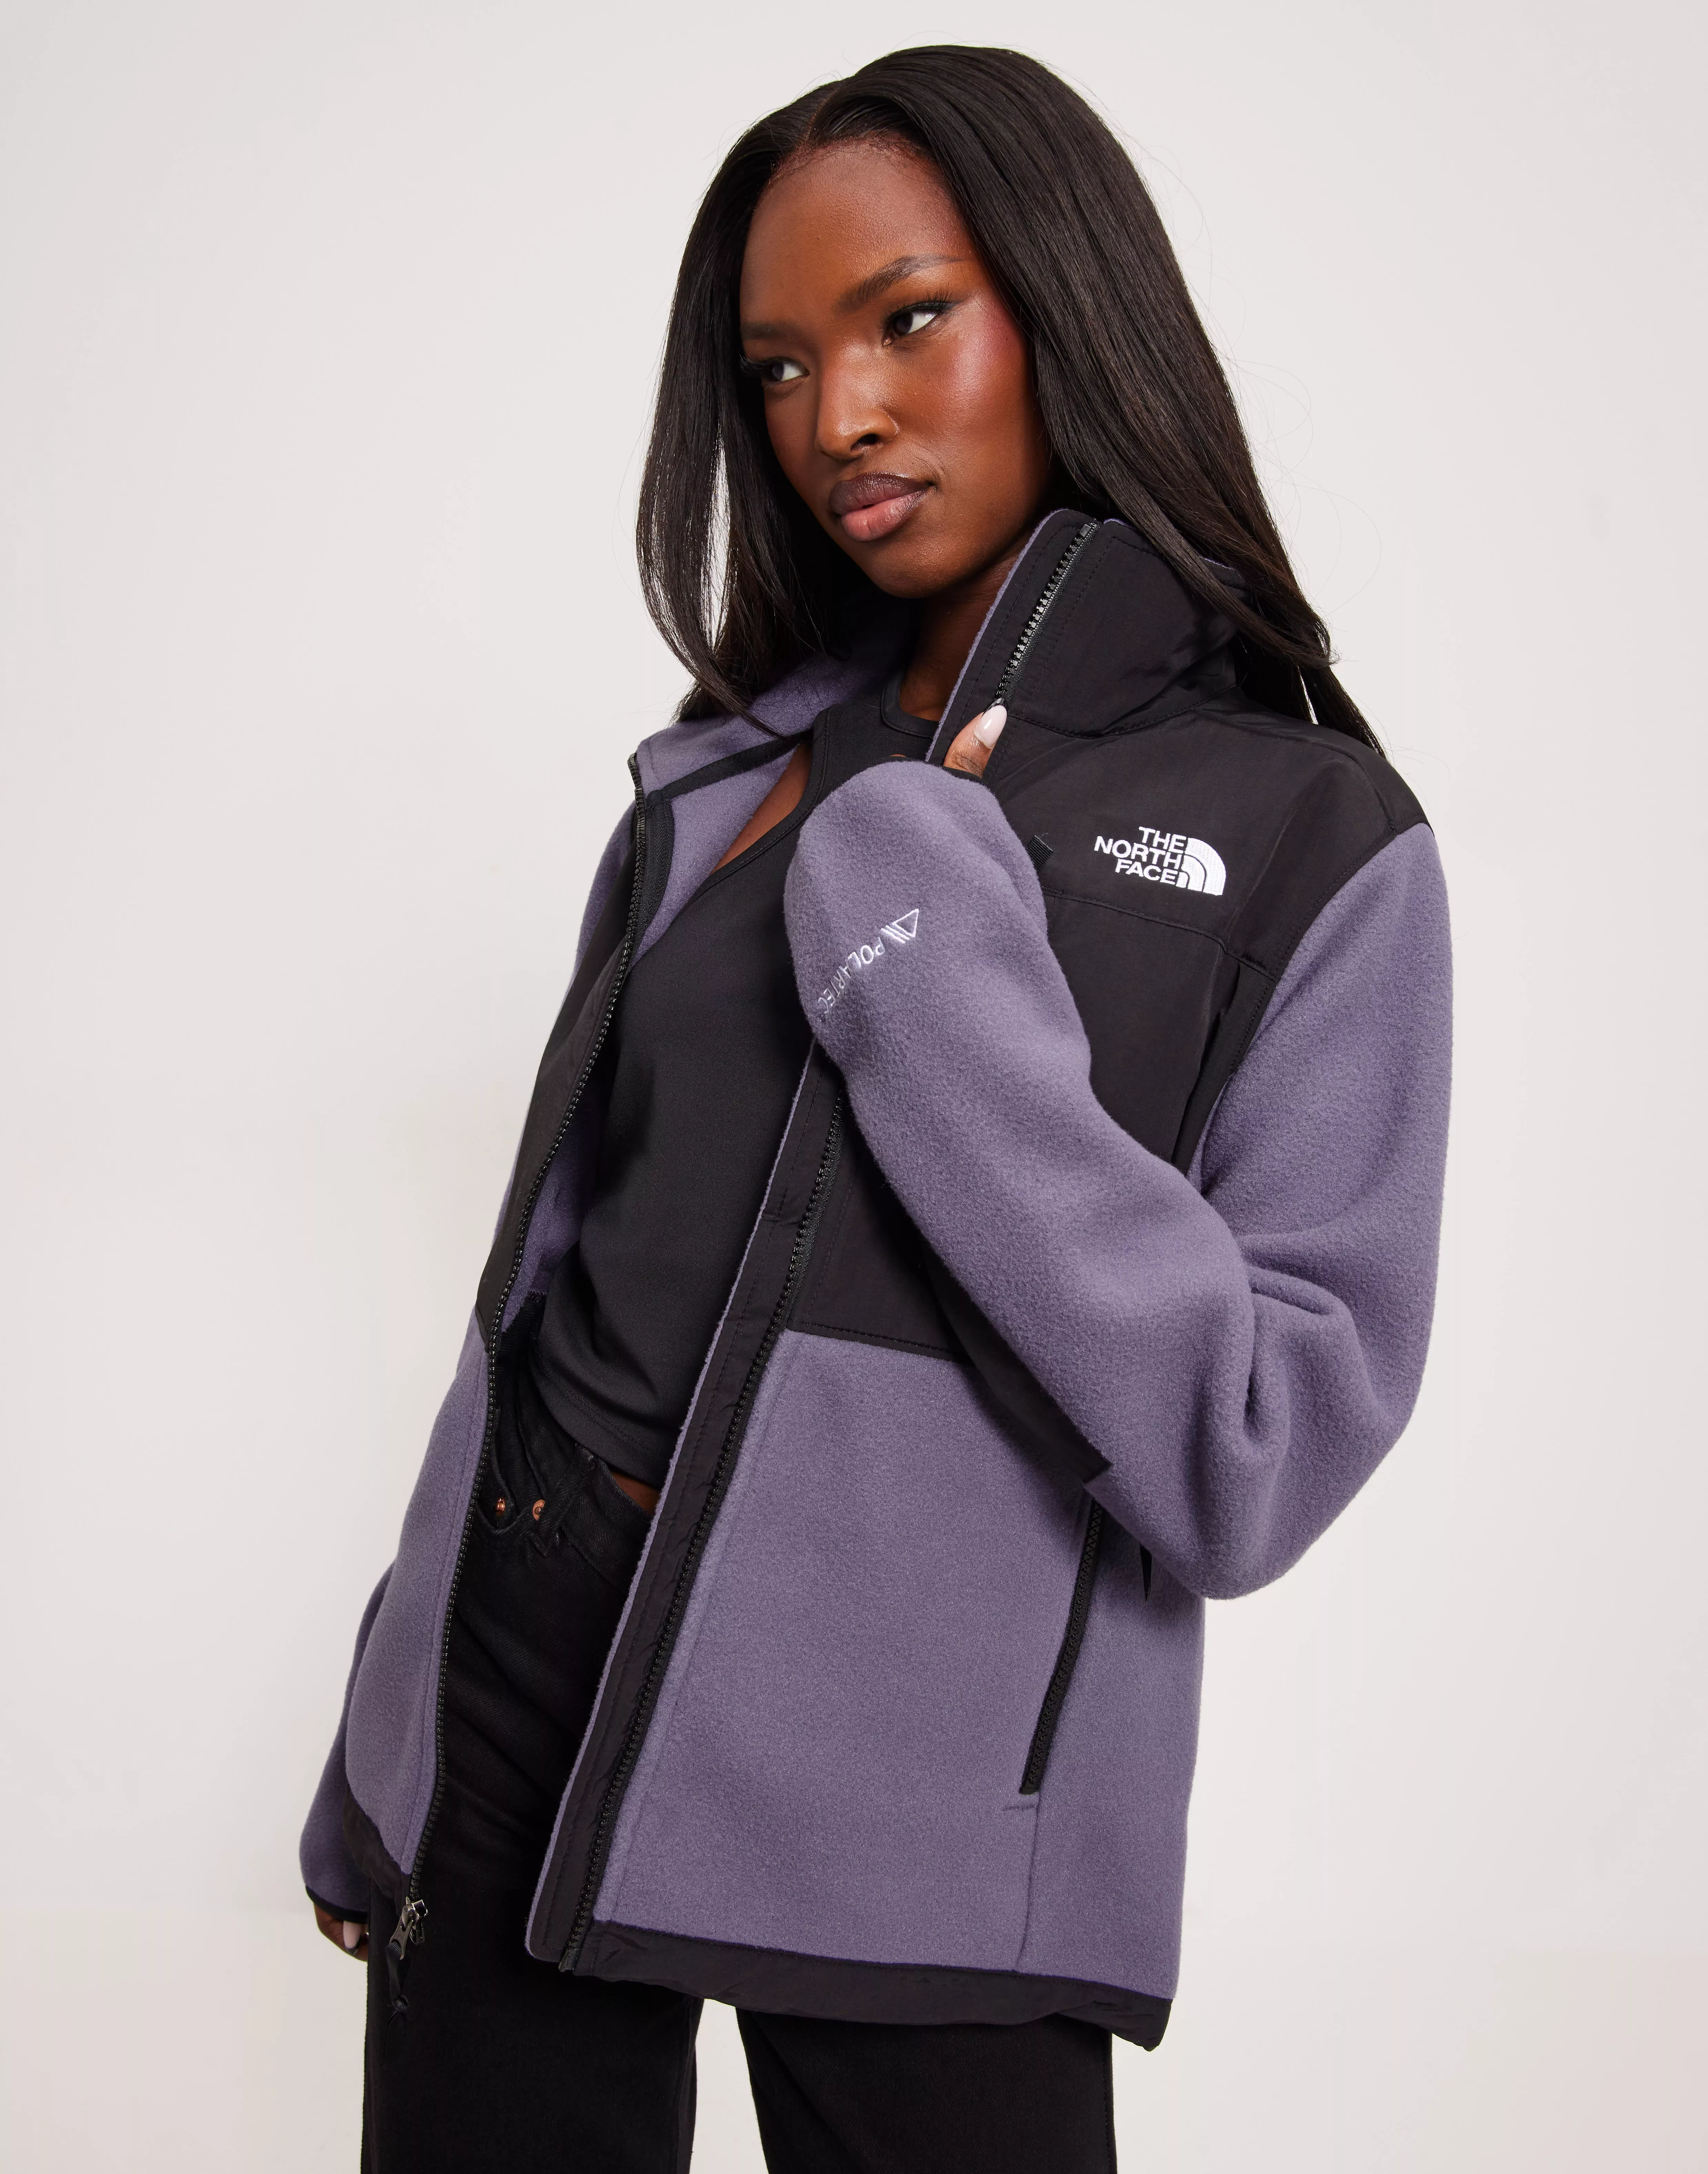 Buy Women's The North Face Jackets Online